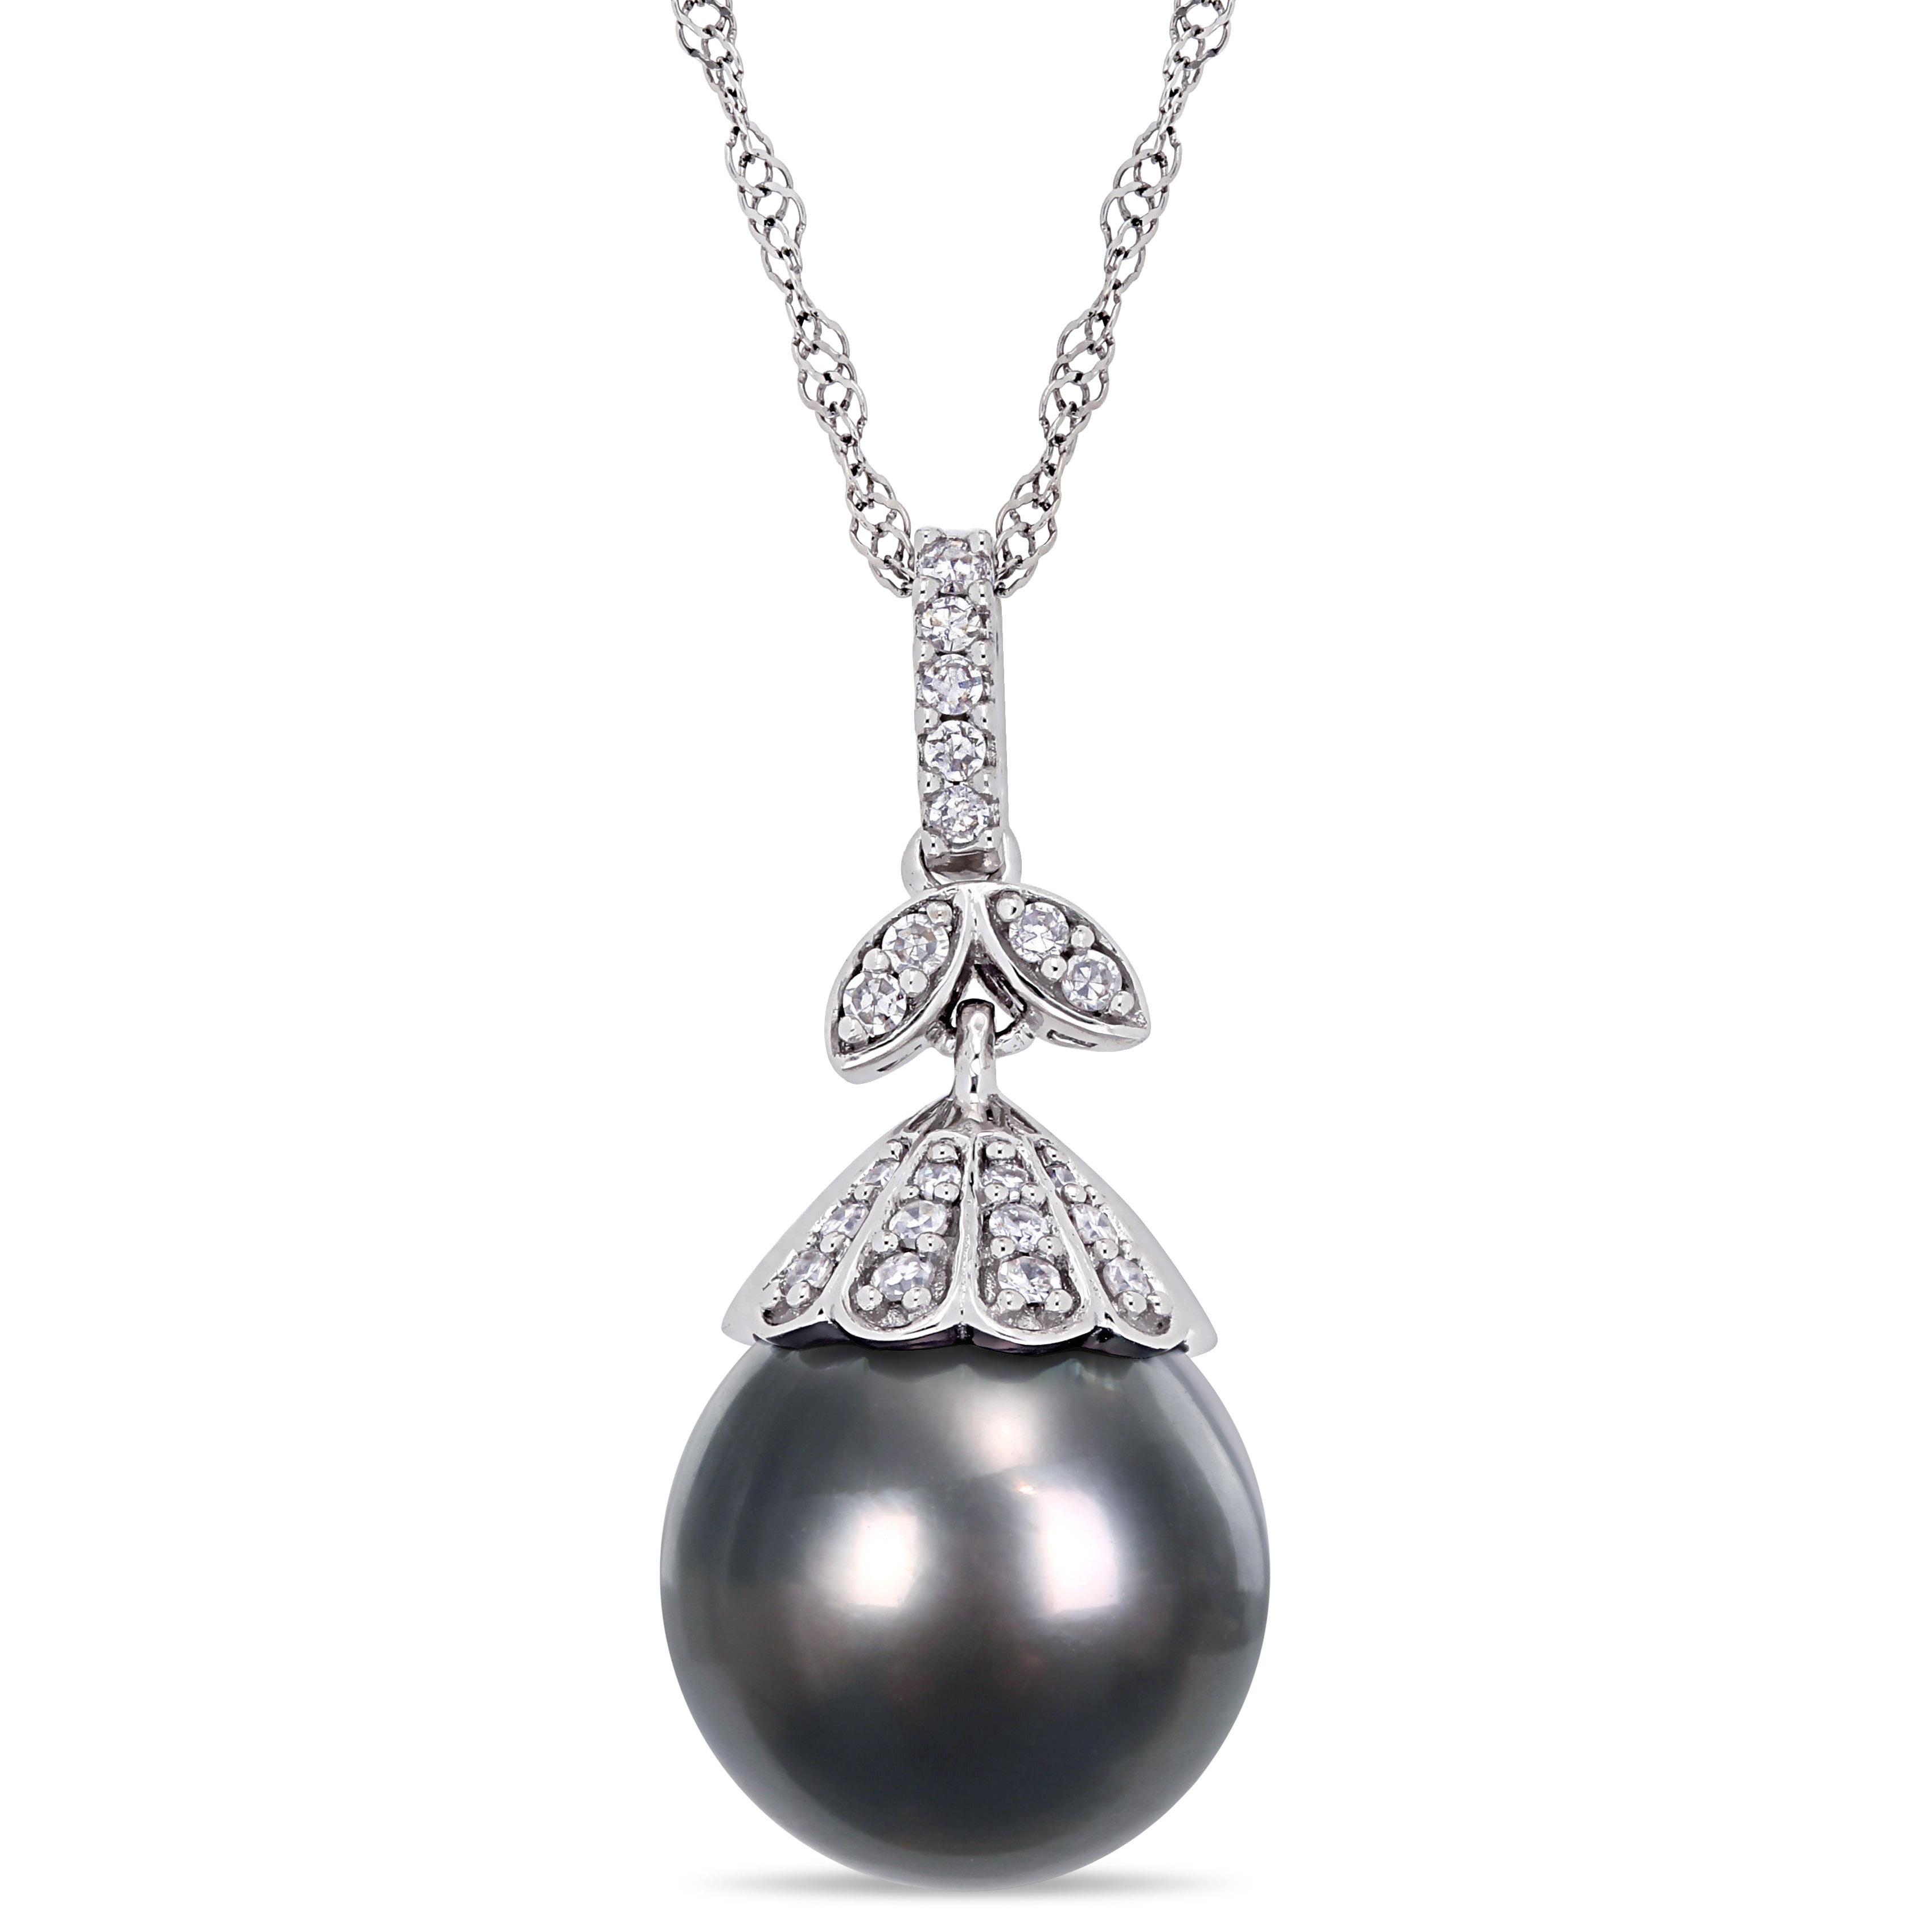 10-10.5 MM Black Tahitian Pearl and 1/10 CT TW Diamond Floral Drop Pendant with Chain in 14k White Gold